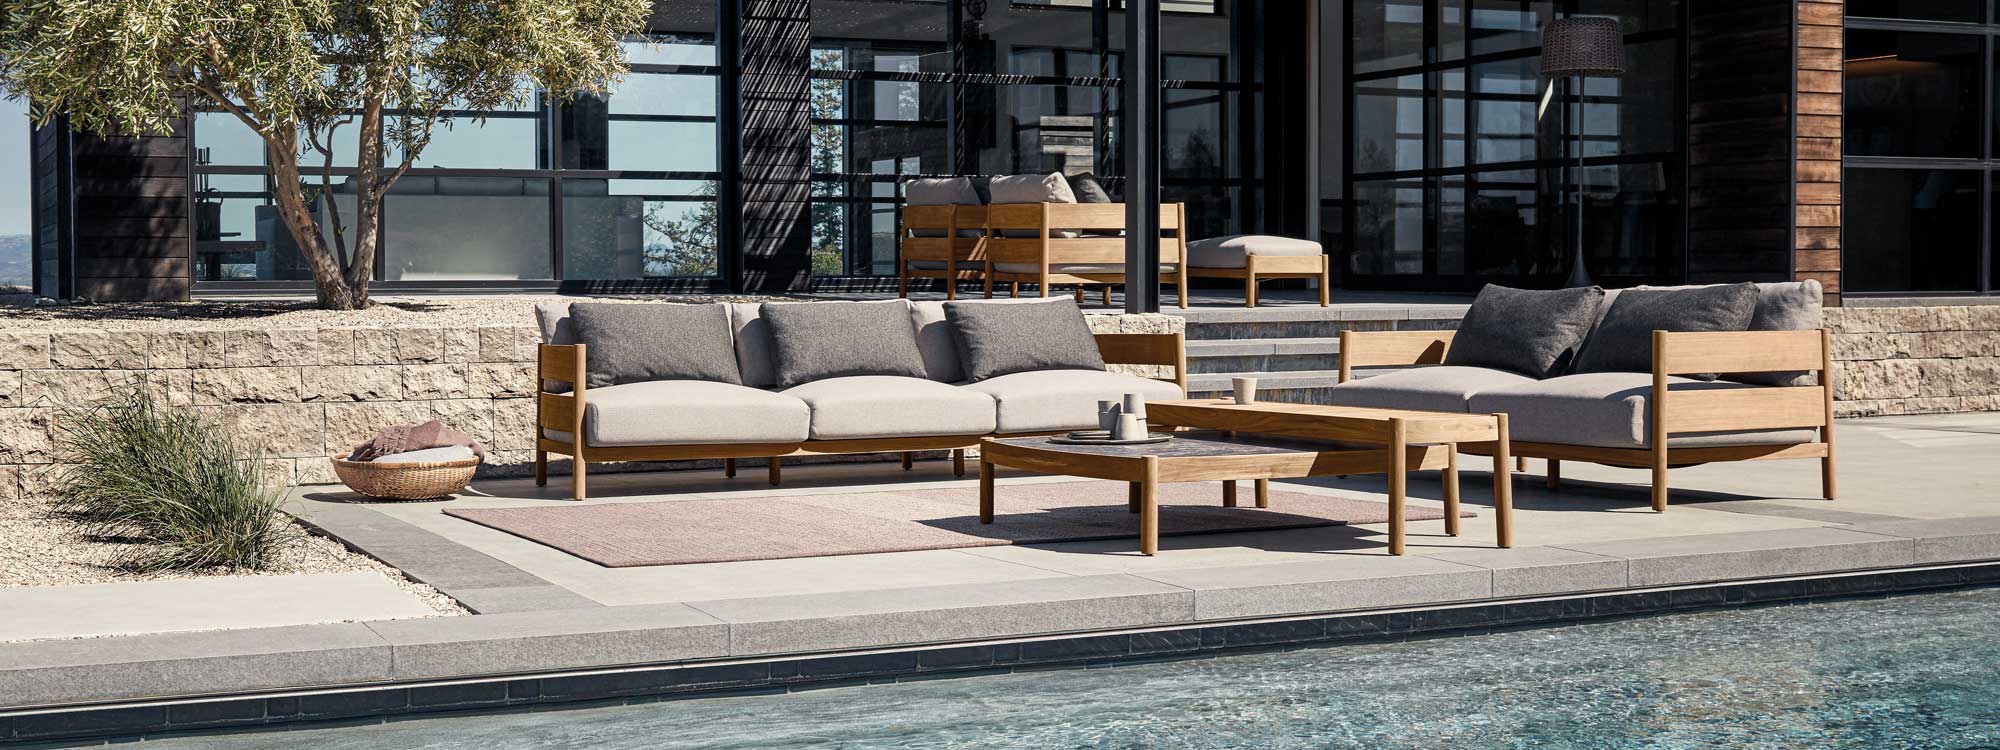 Image of Gloster Haven modern teak garden sofas on tiered terraces with elegant modern house in the immediate background